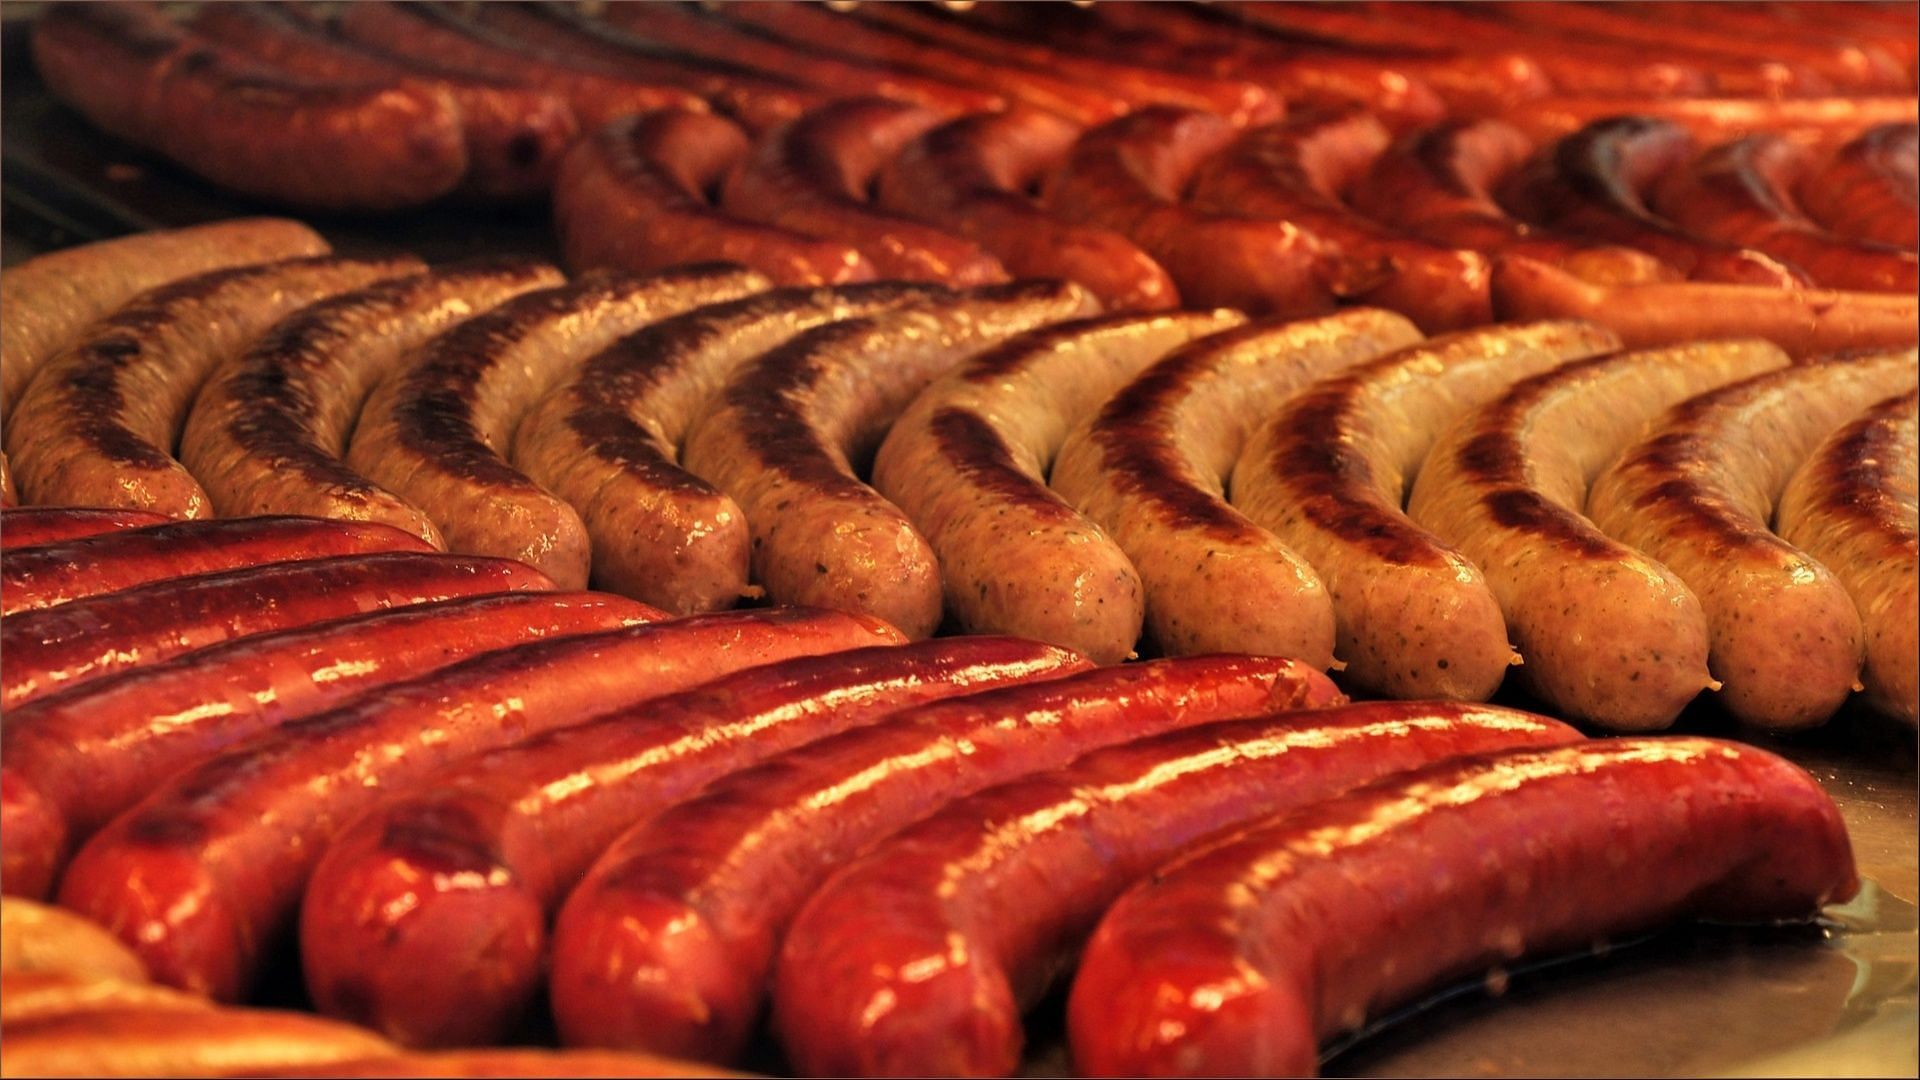 The recalled Johnsonville turkey kielbasa sausage products were distributed all across the United States (Image via Charly_7777 / Pixabay)